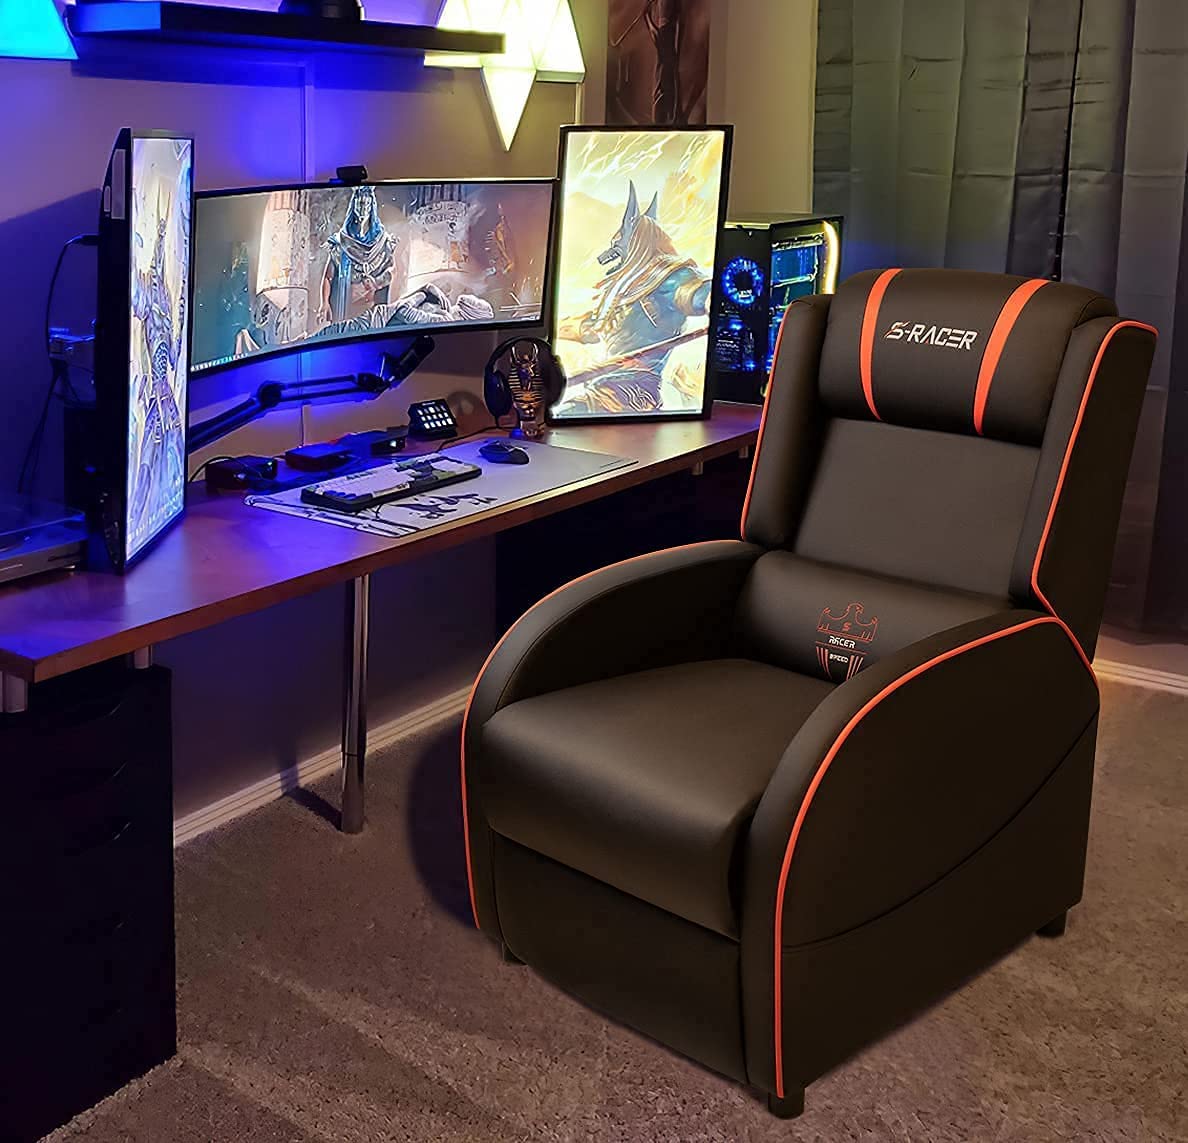 Homall Gaming Recliner Chair